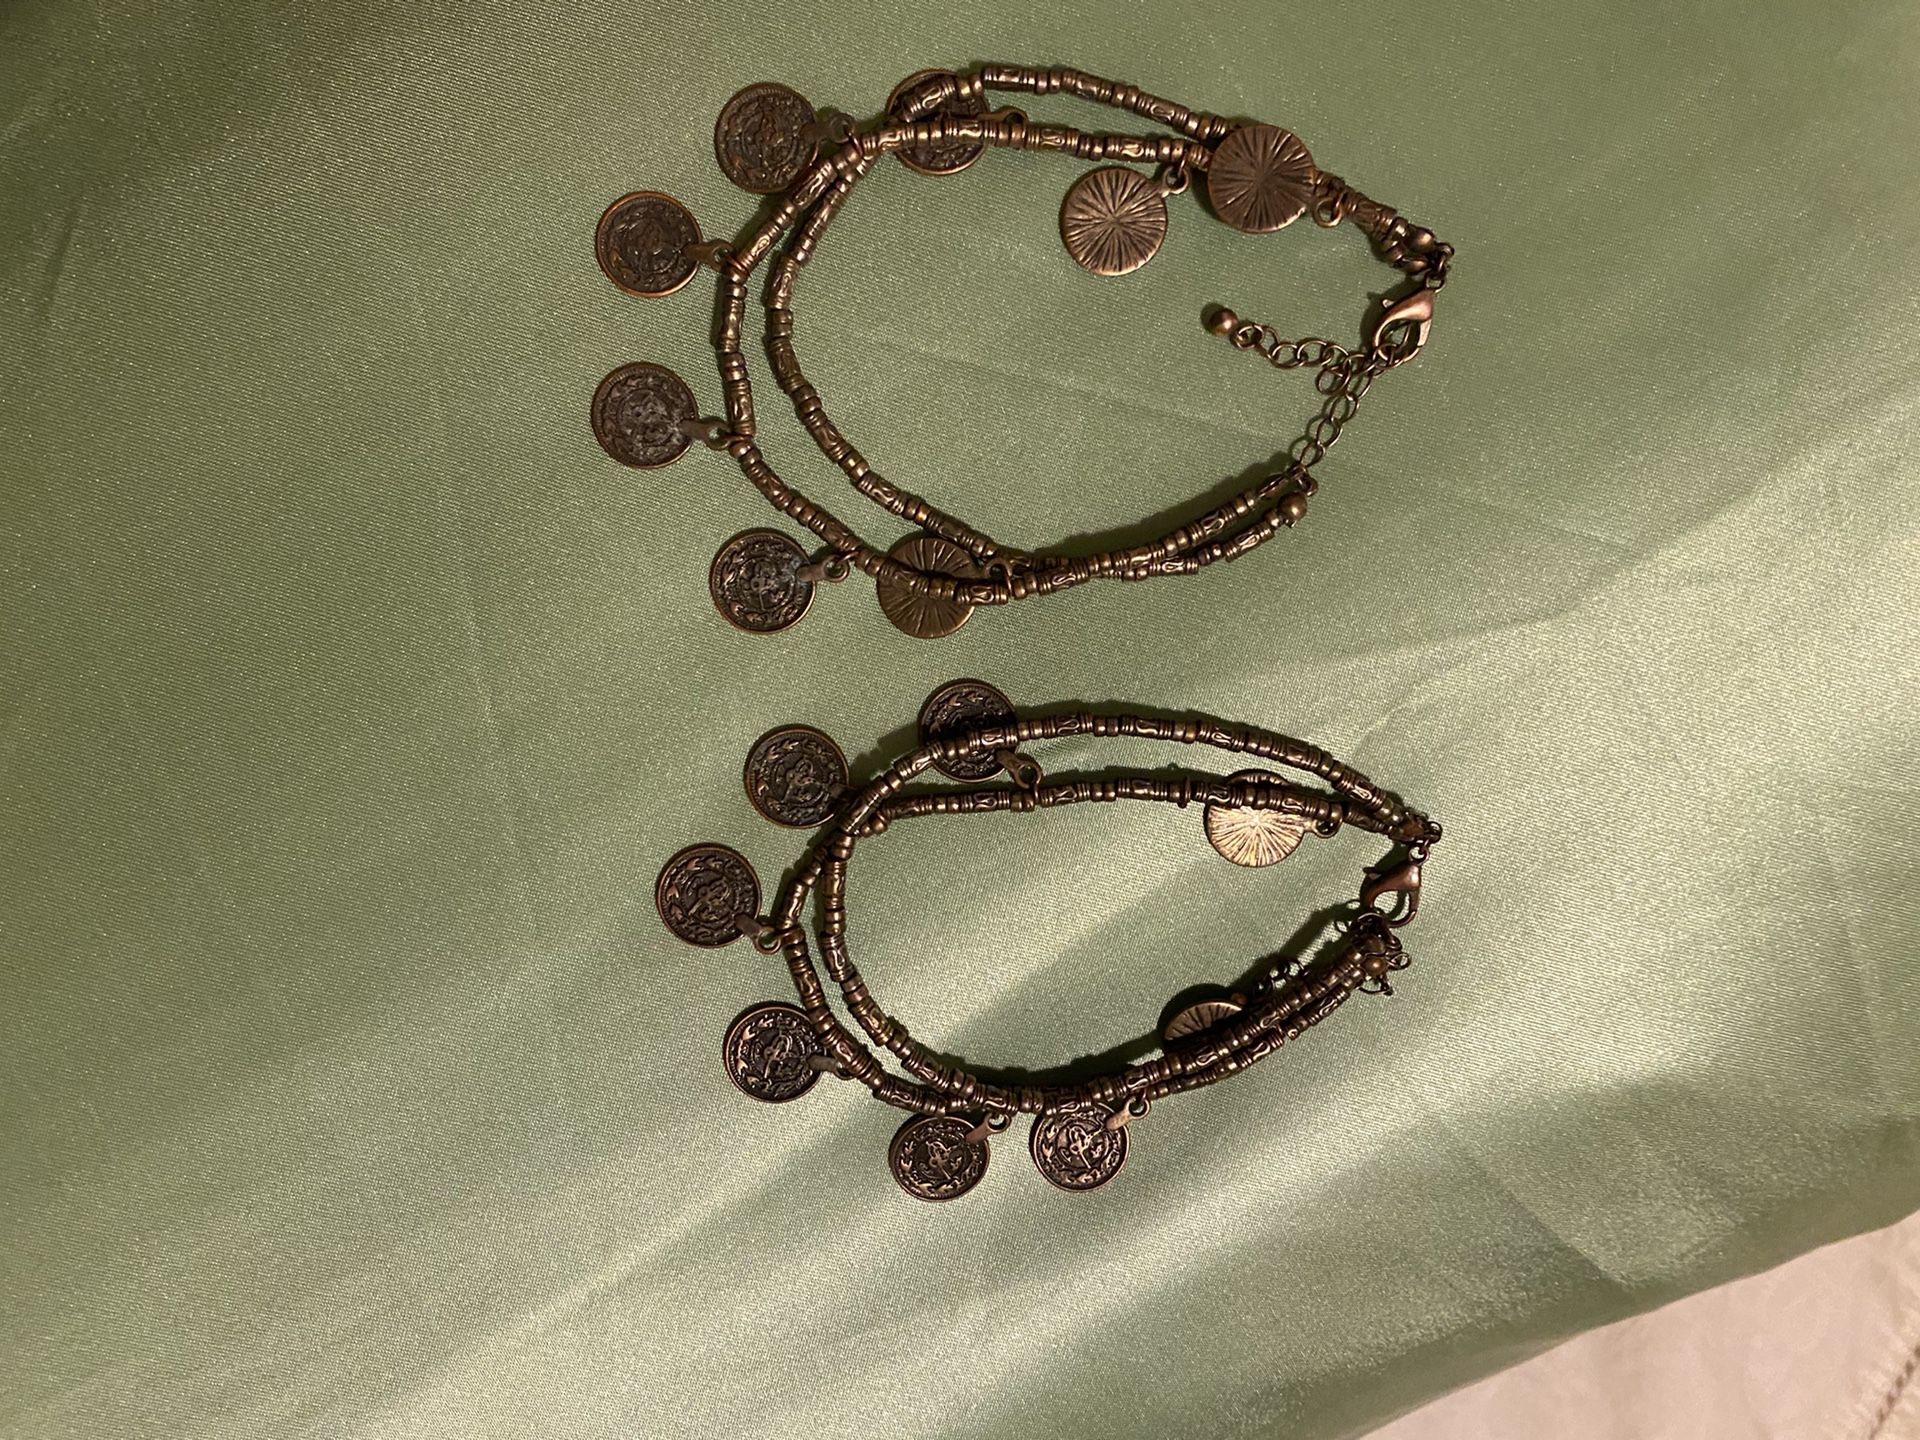 Misc Jewelry - Anklets, Lucky Guitar Pick Necklace, And Earrings